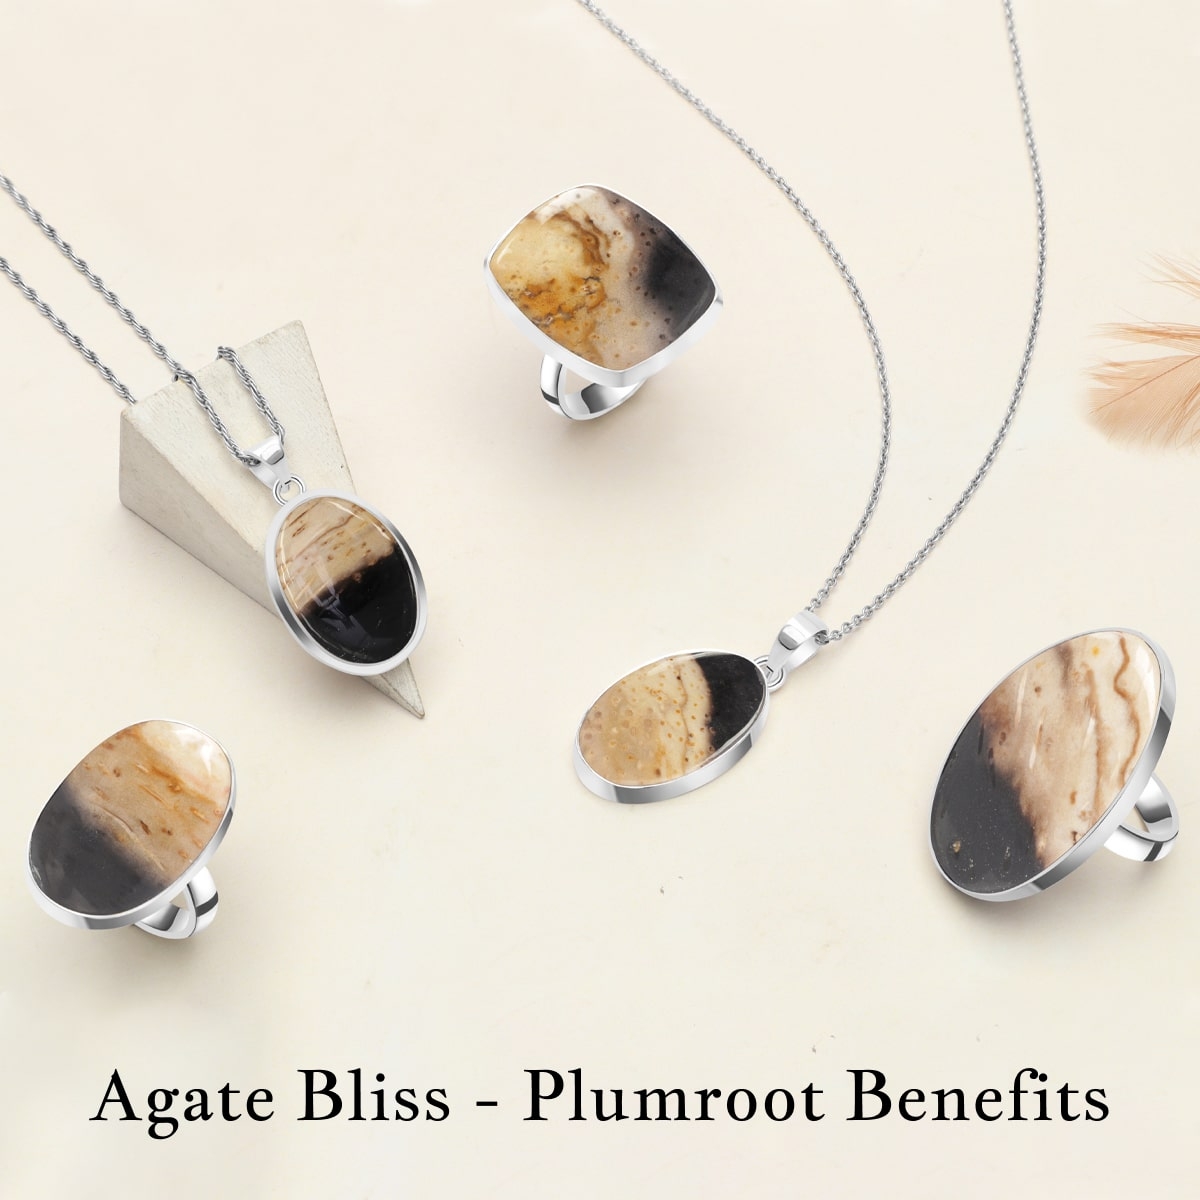 Benefits of Plumroot agate